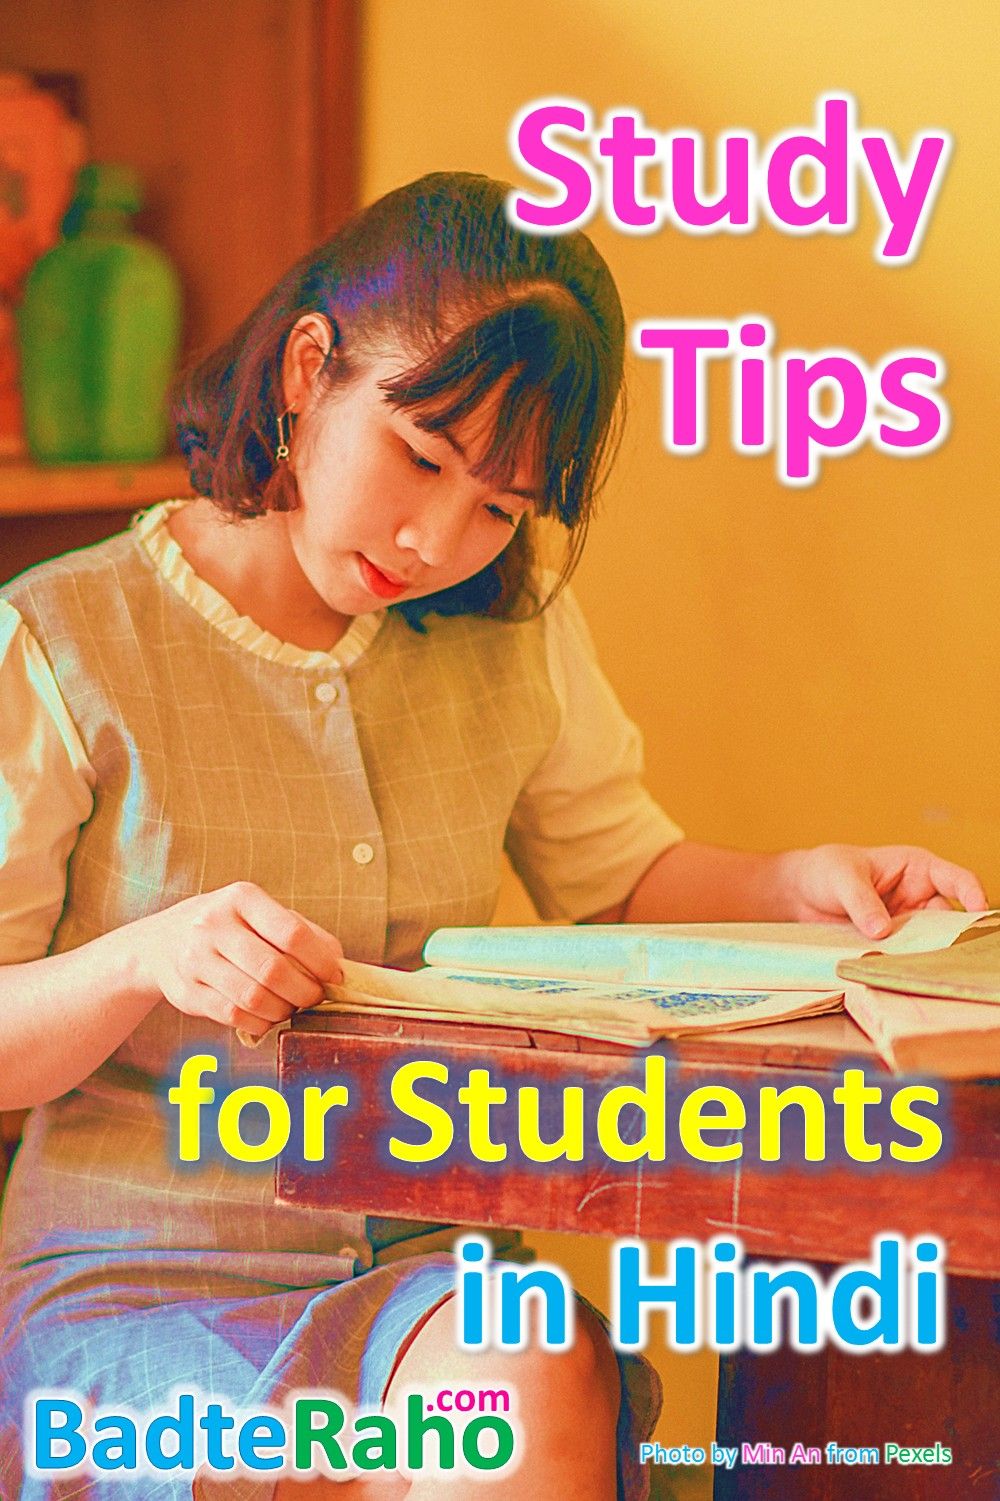 Study-tips-for-Students-pinterest